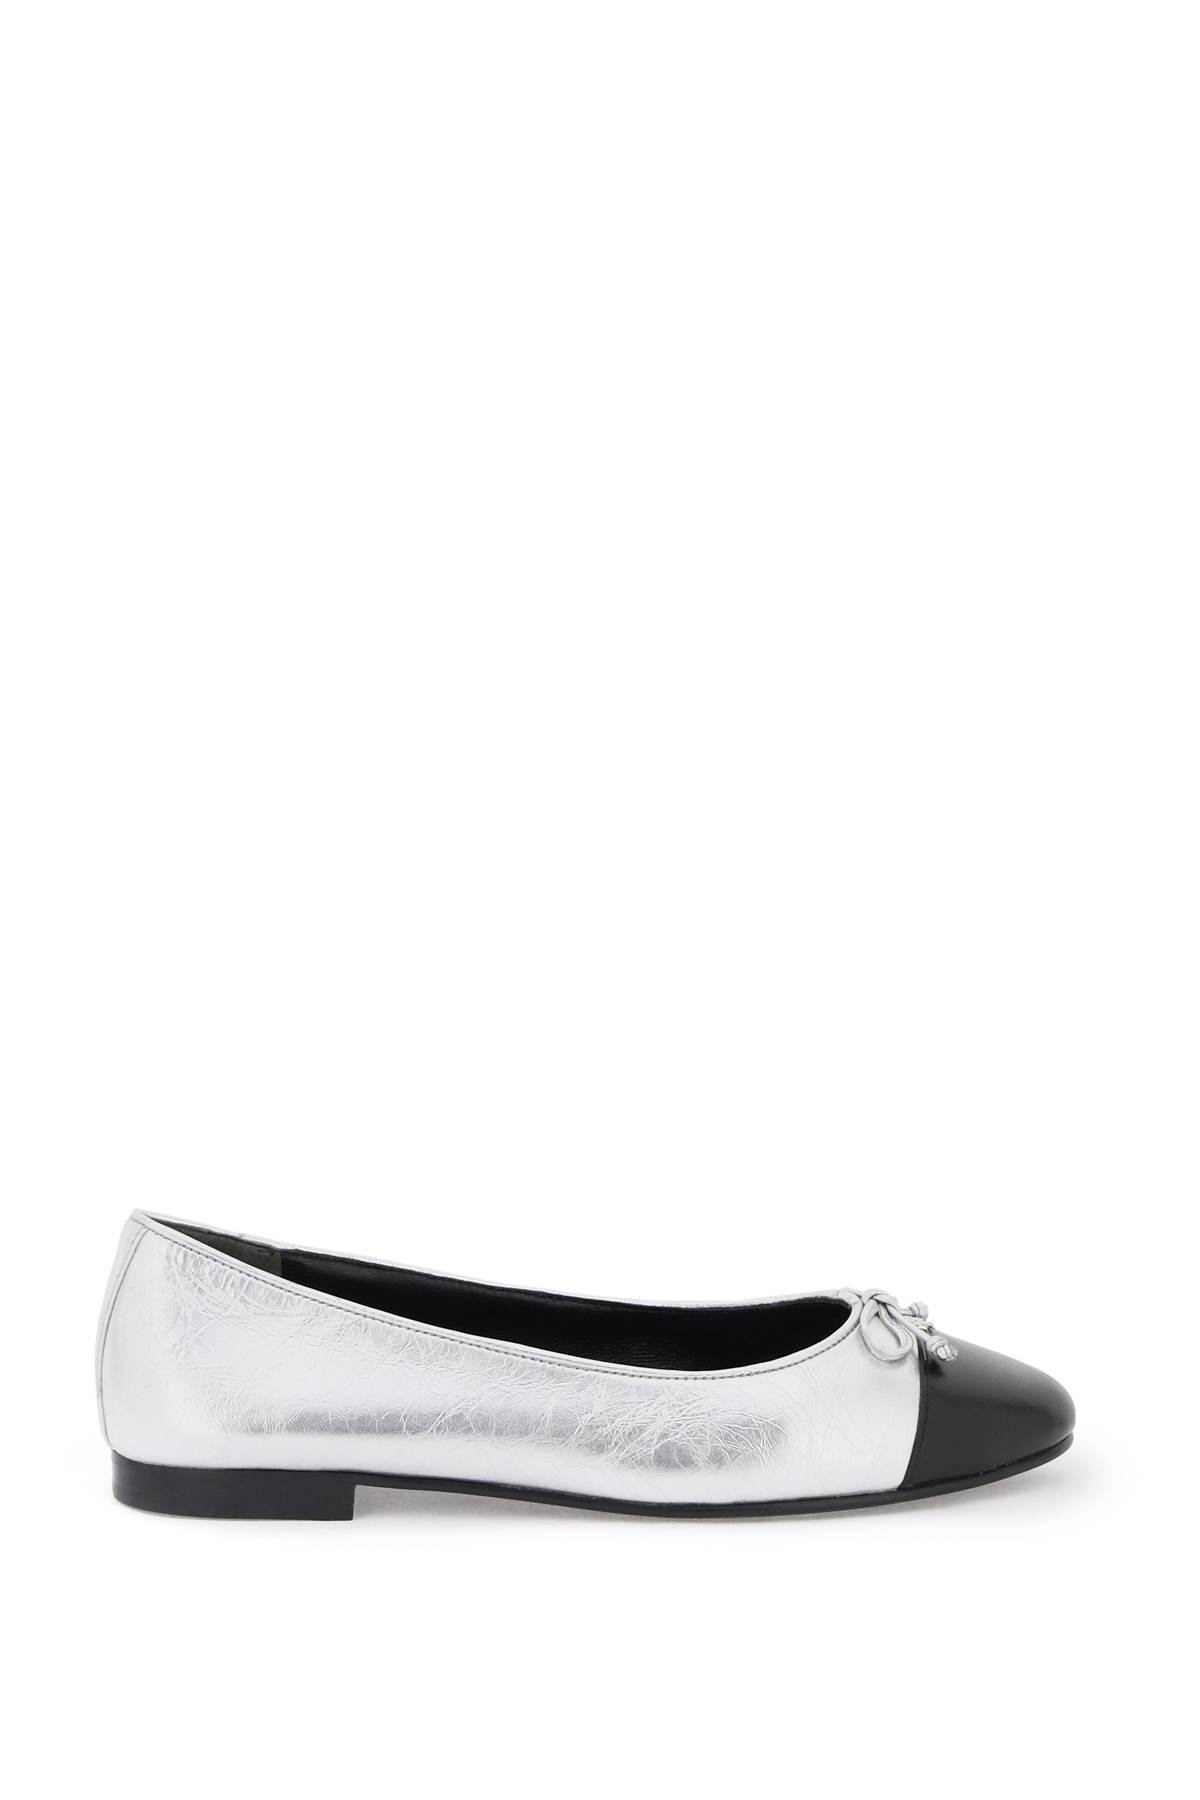 Shop Tory Burch Laminated Ballet Flats With Contrasting Toe In Silver Perfect Black (silver)